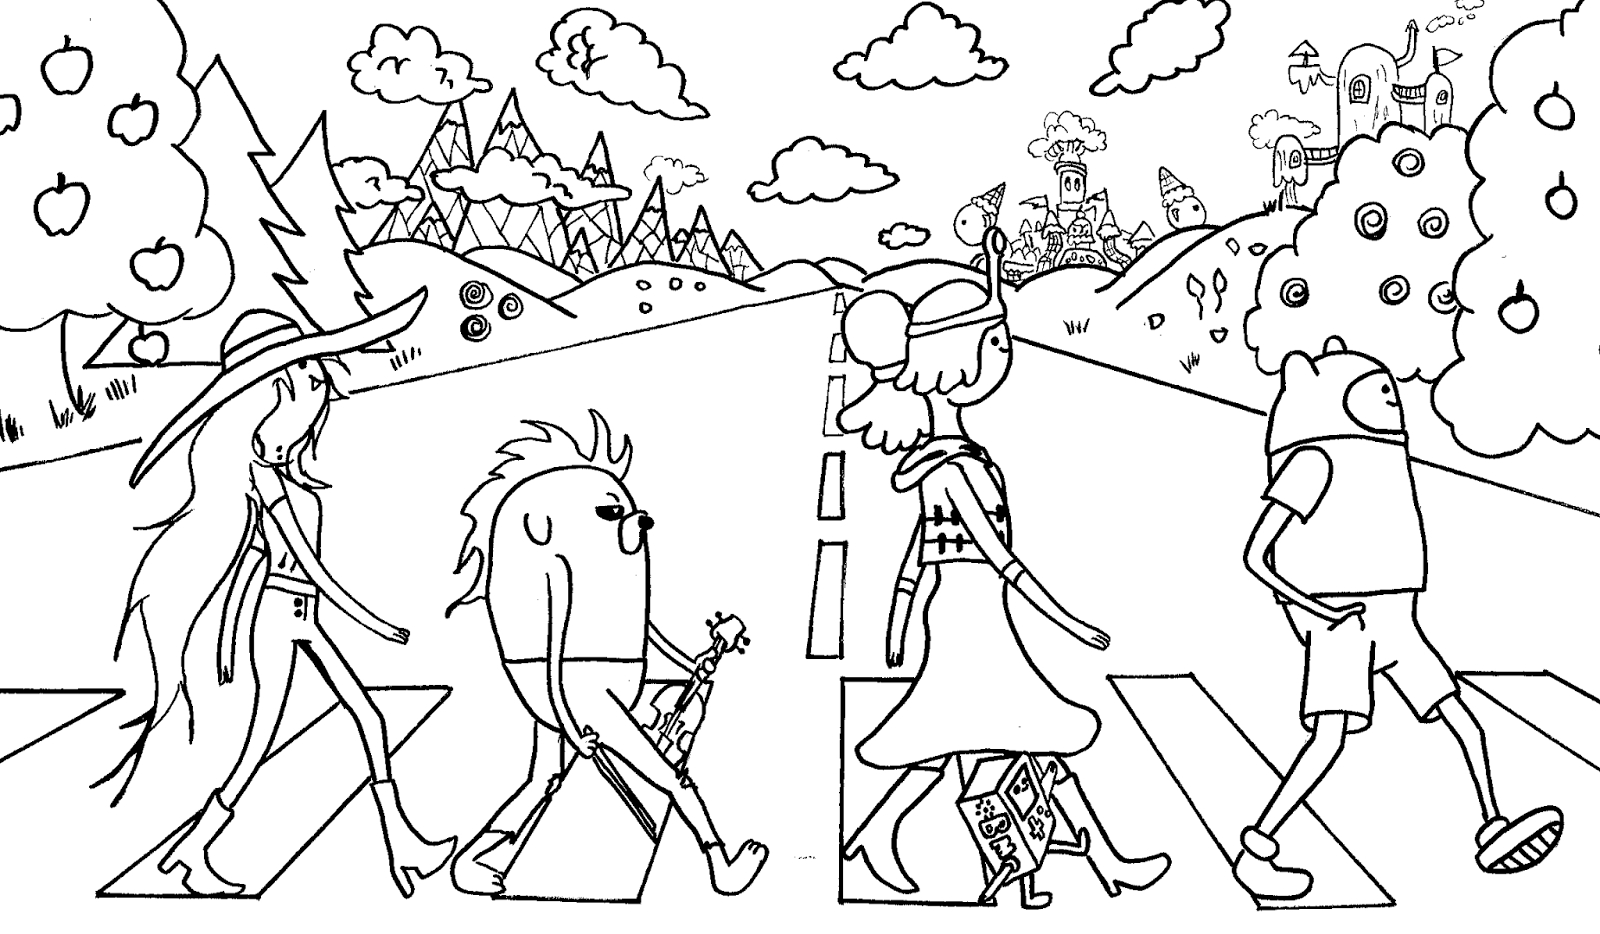 Printable Adventure Time Coloring Pages Adventure Time Coloring Pages Best Coloring Pages For Kids